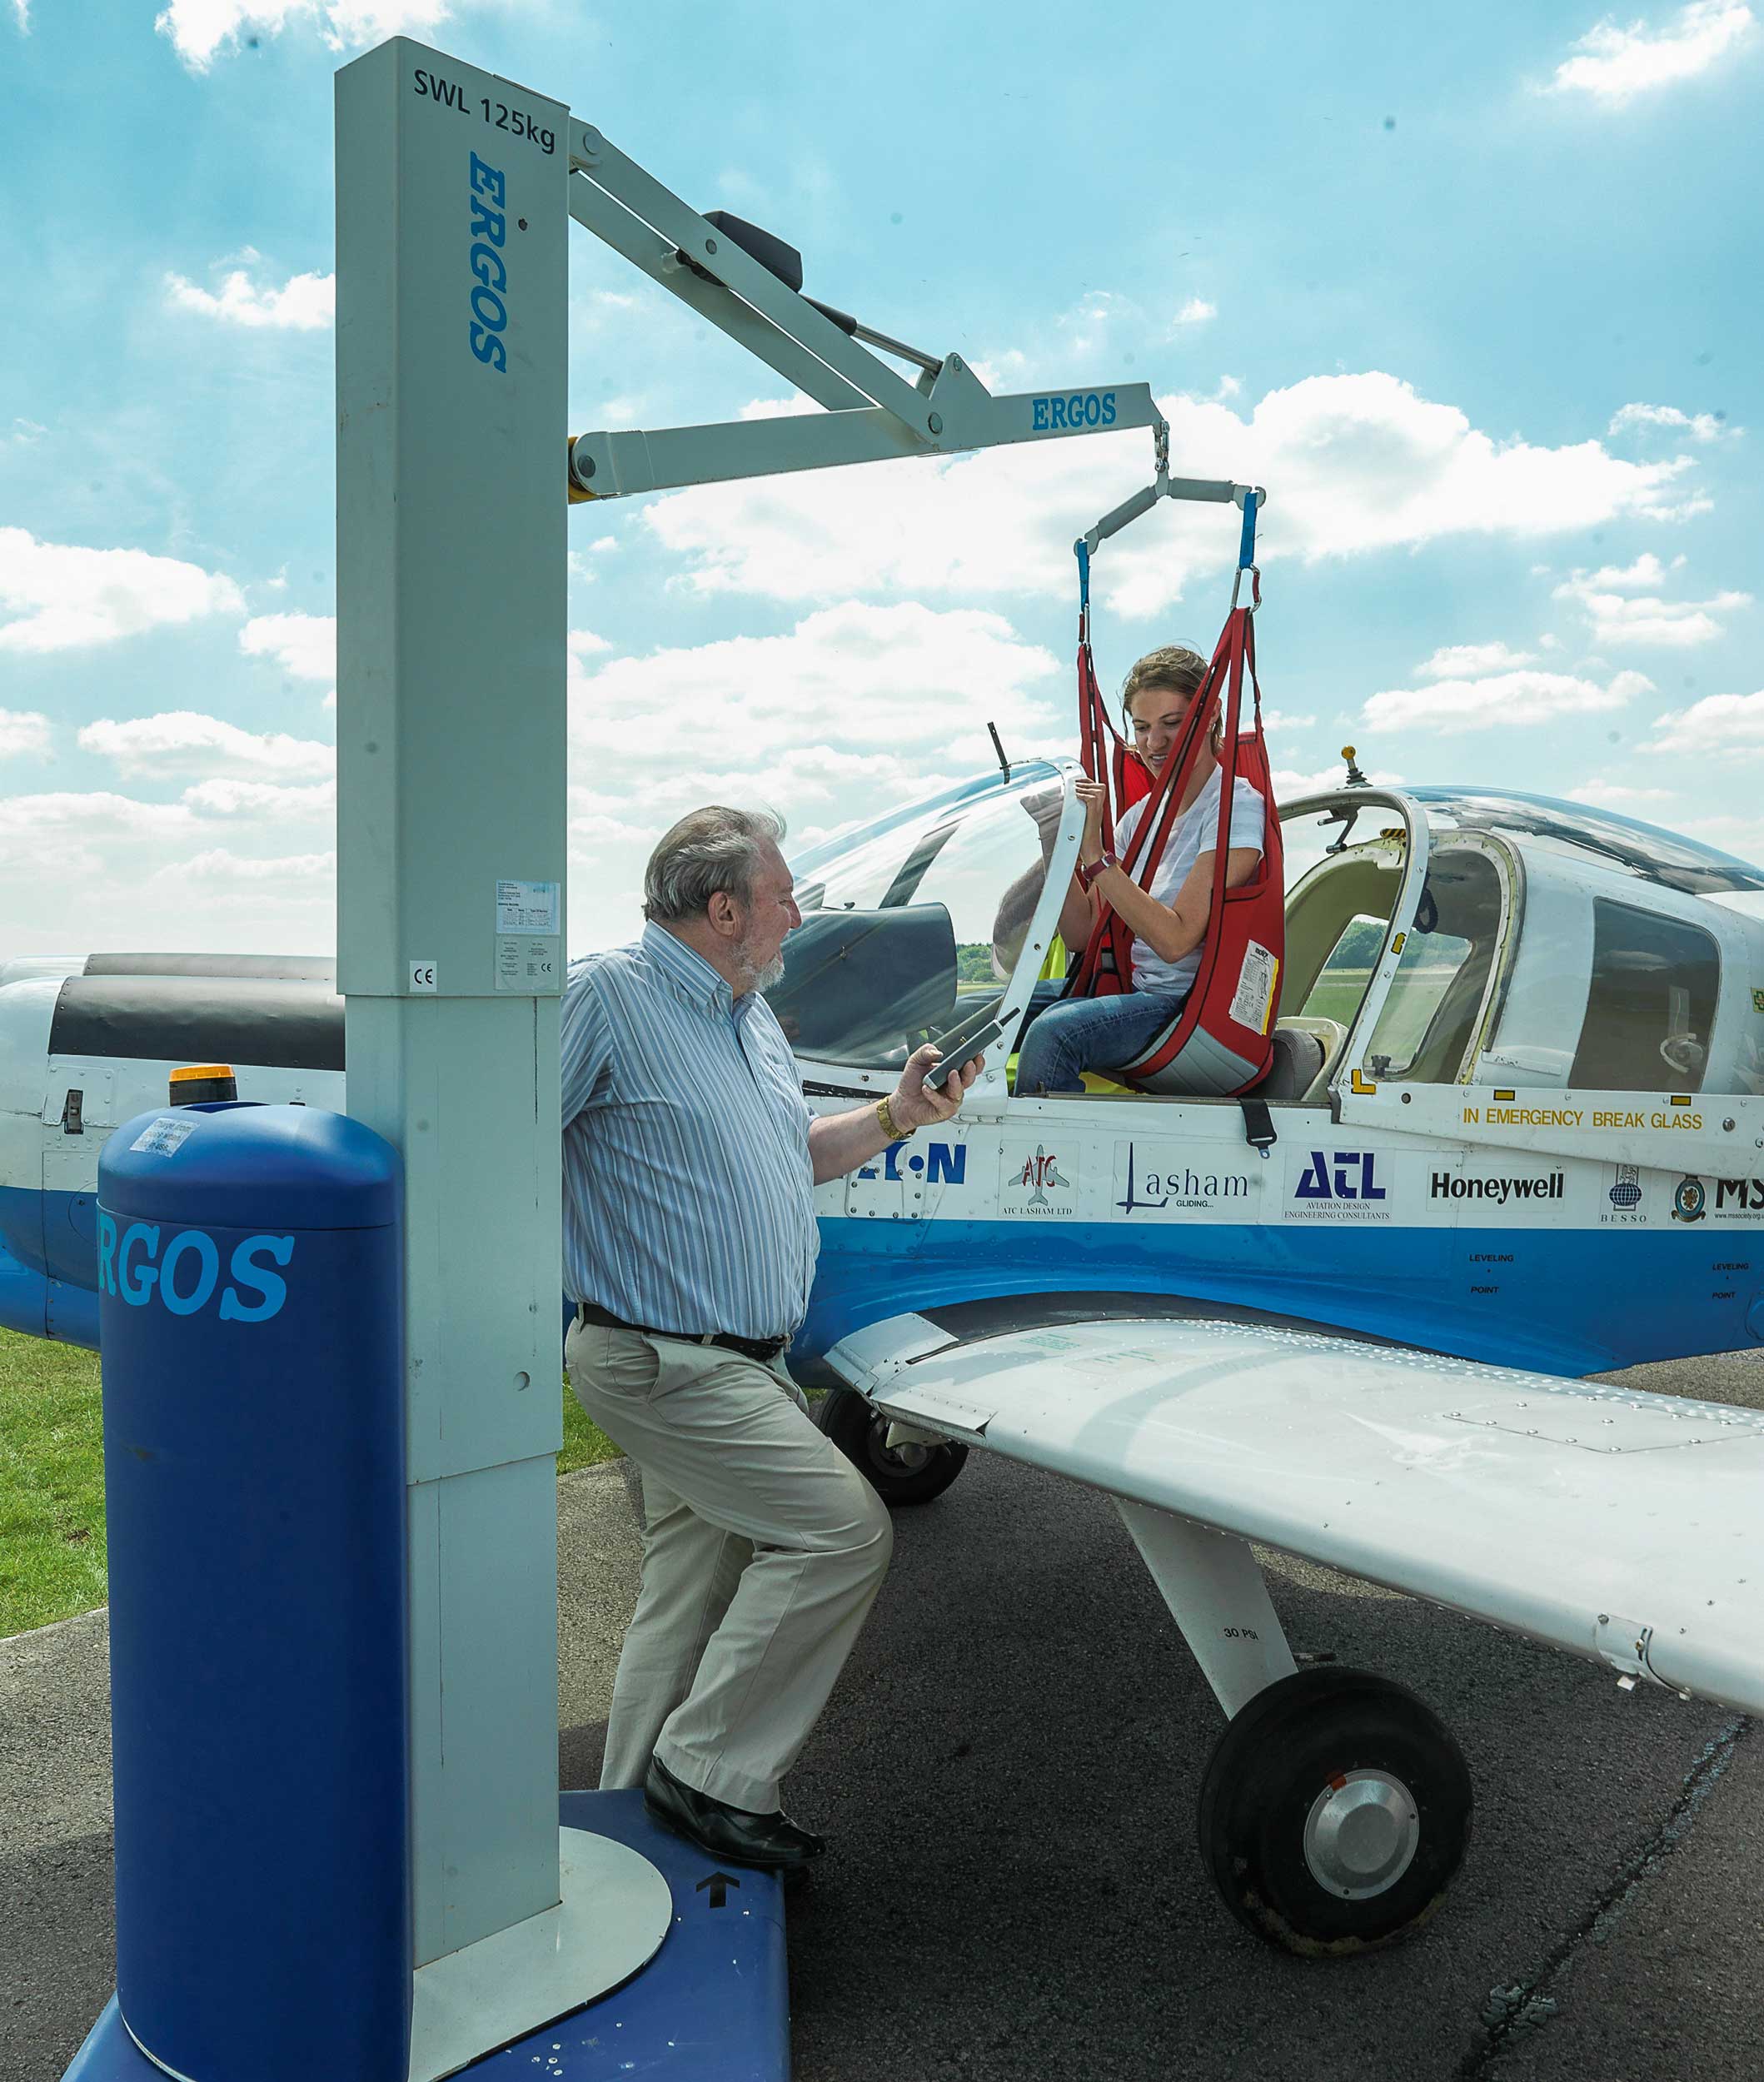 Aerobility uses specially adapted aircraft, support equipment and specialist instruction to ensure access for all